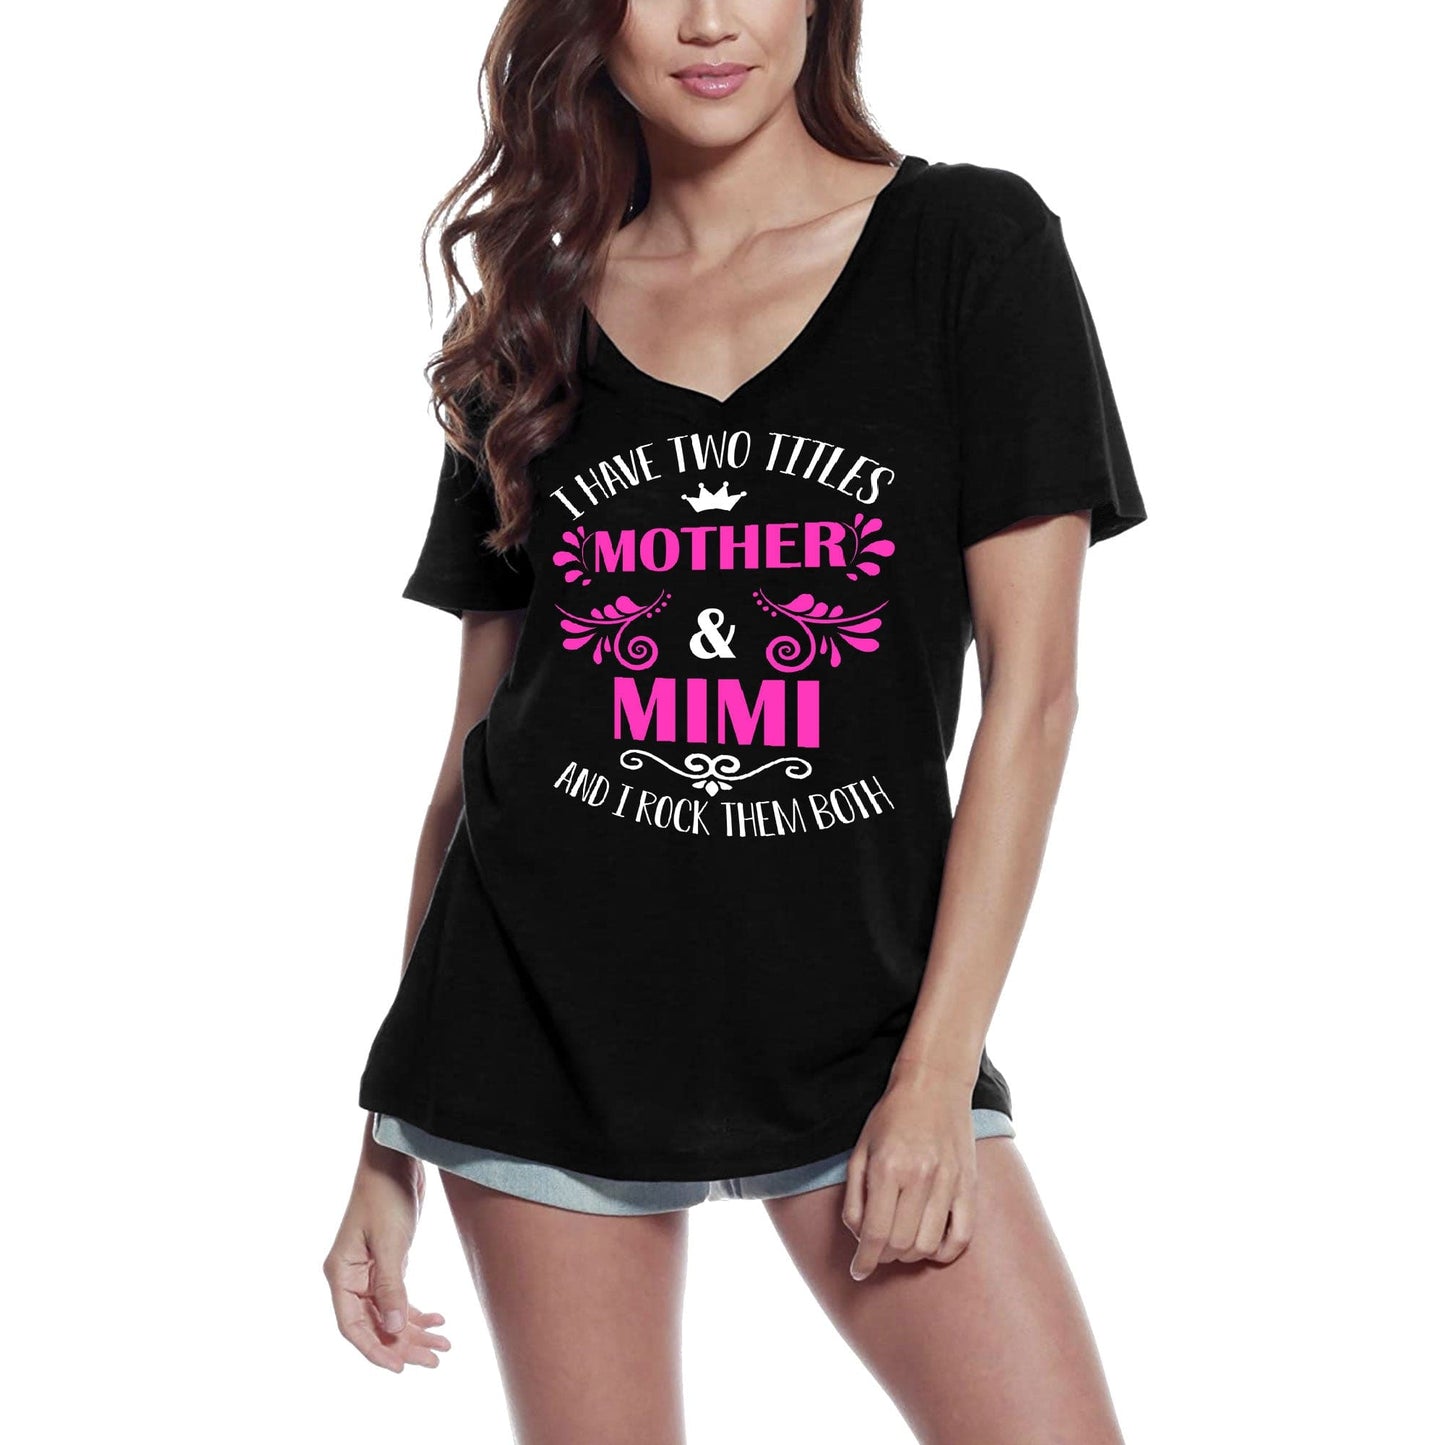 ULTRABASIC Women's T-Shirt I Have 2 Titles Mother and Mimi and I Rock Them Both